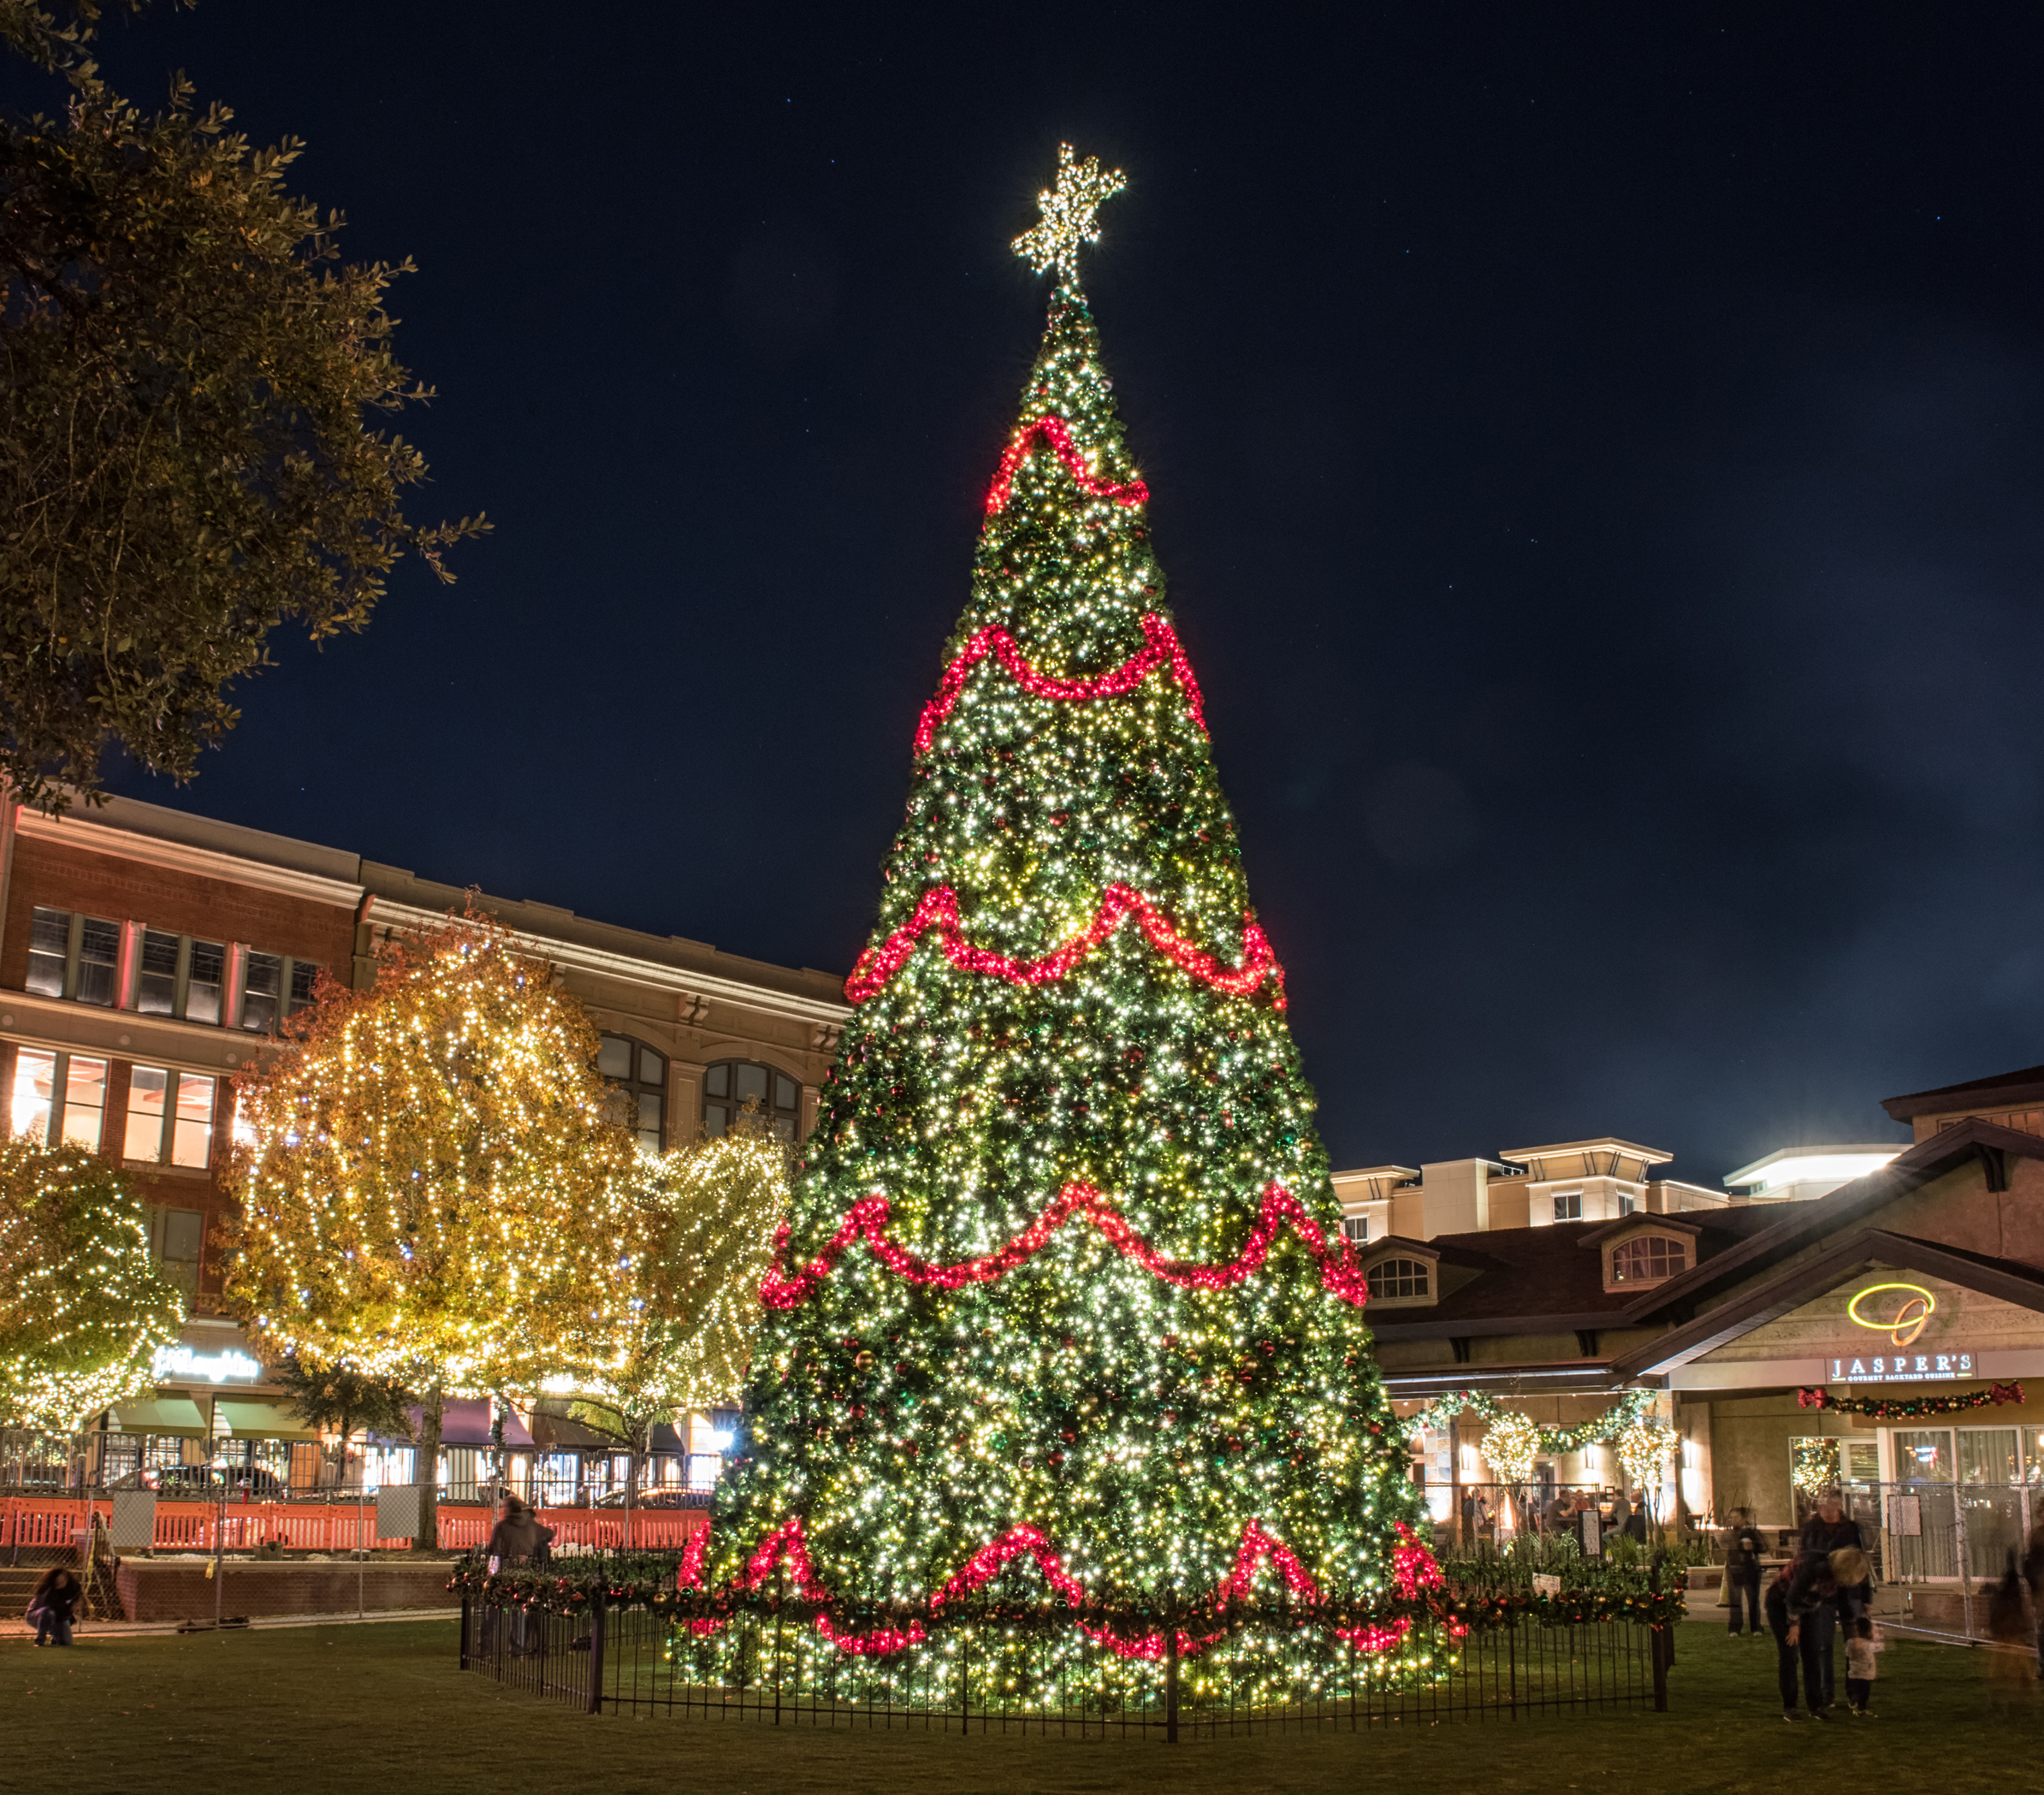 Market Street's massive Christmas tree is a holiday tradition in The Woodlands.